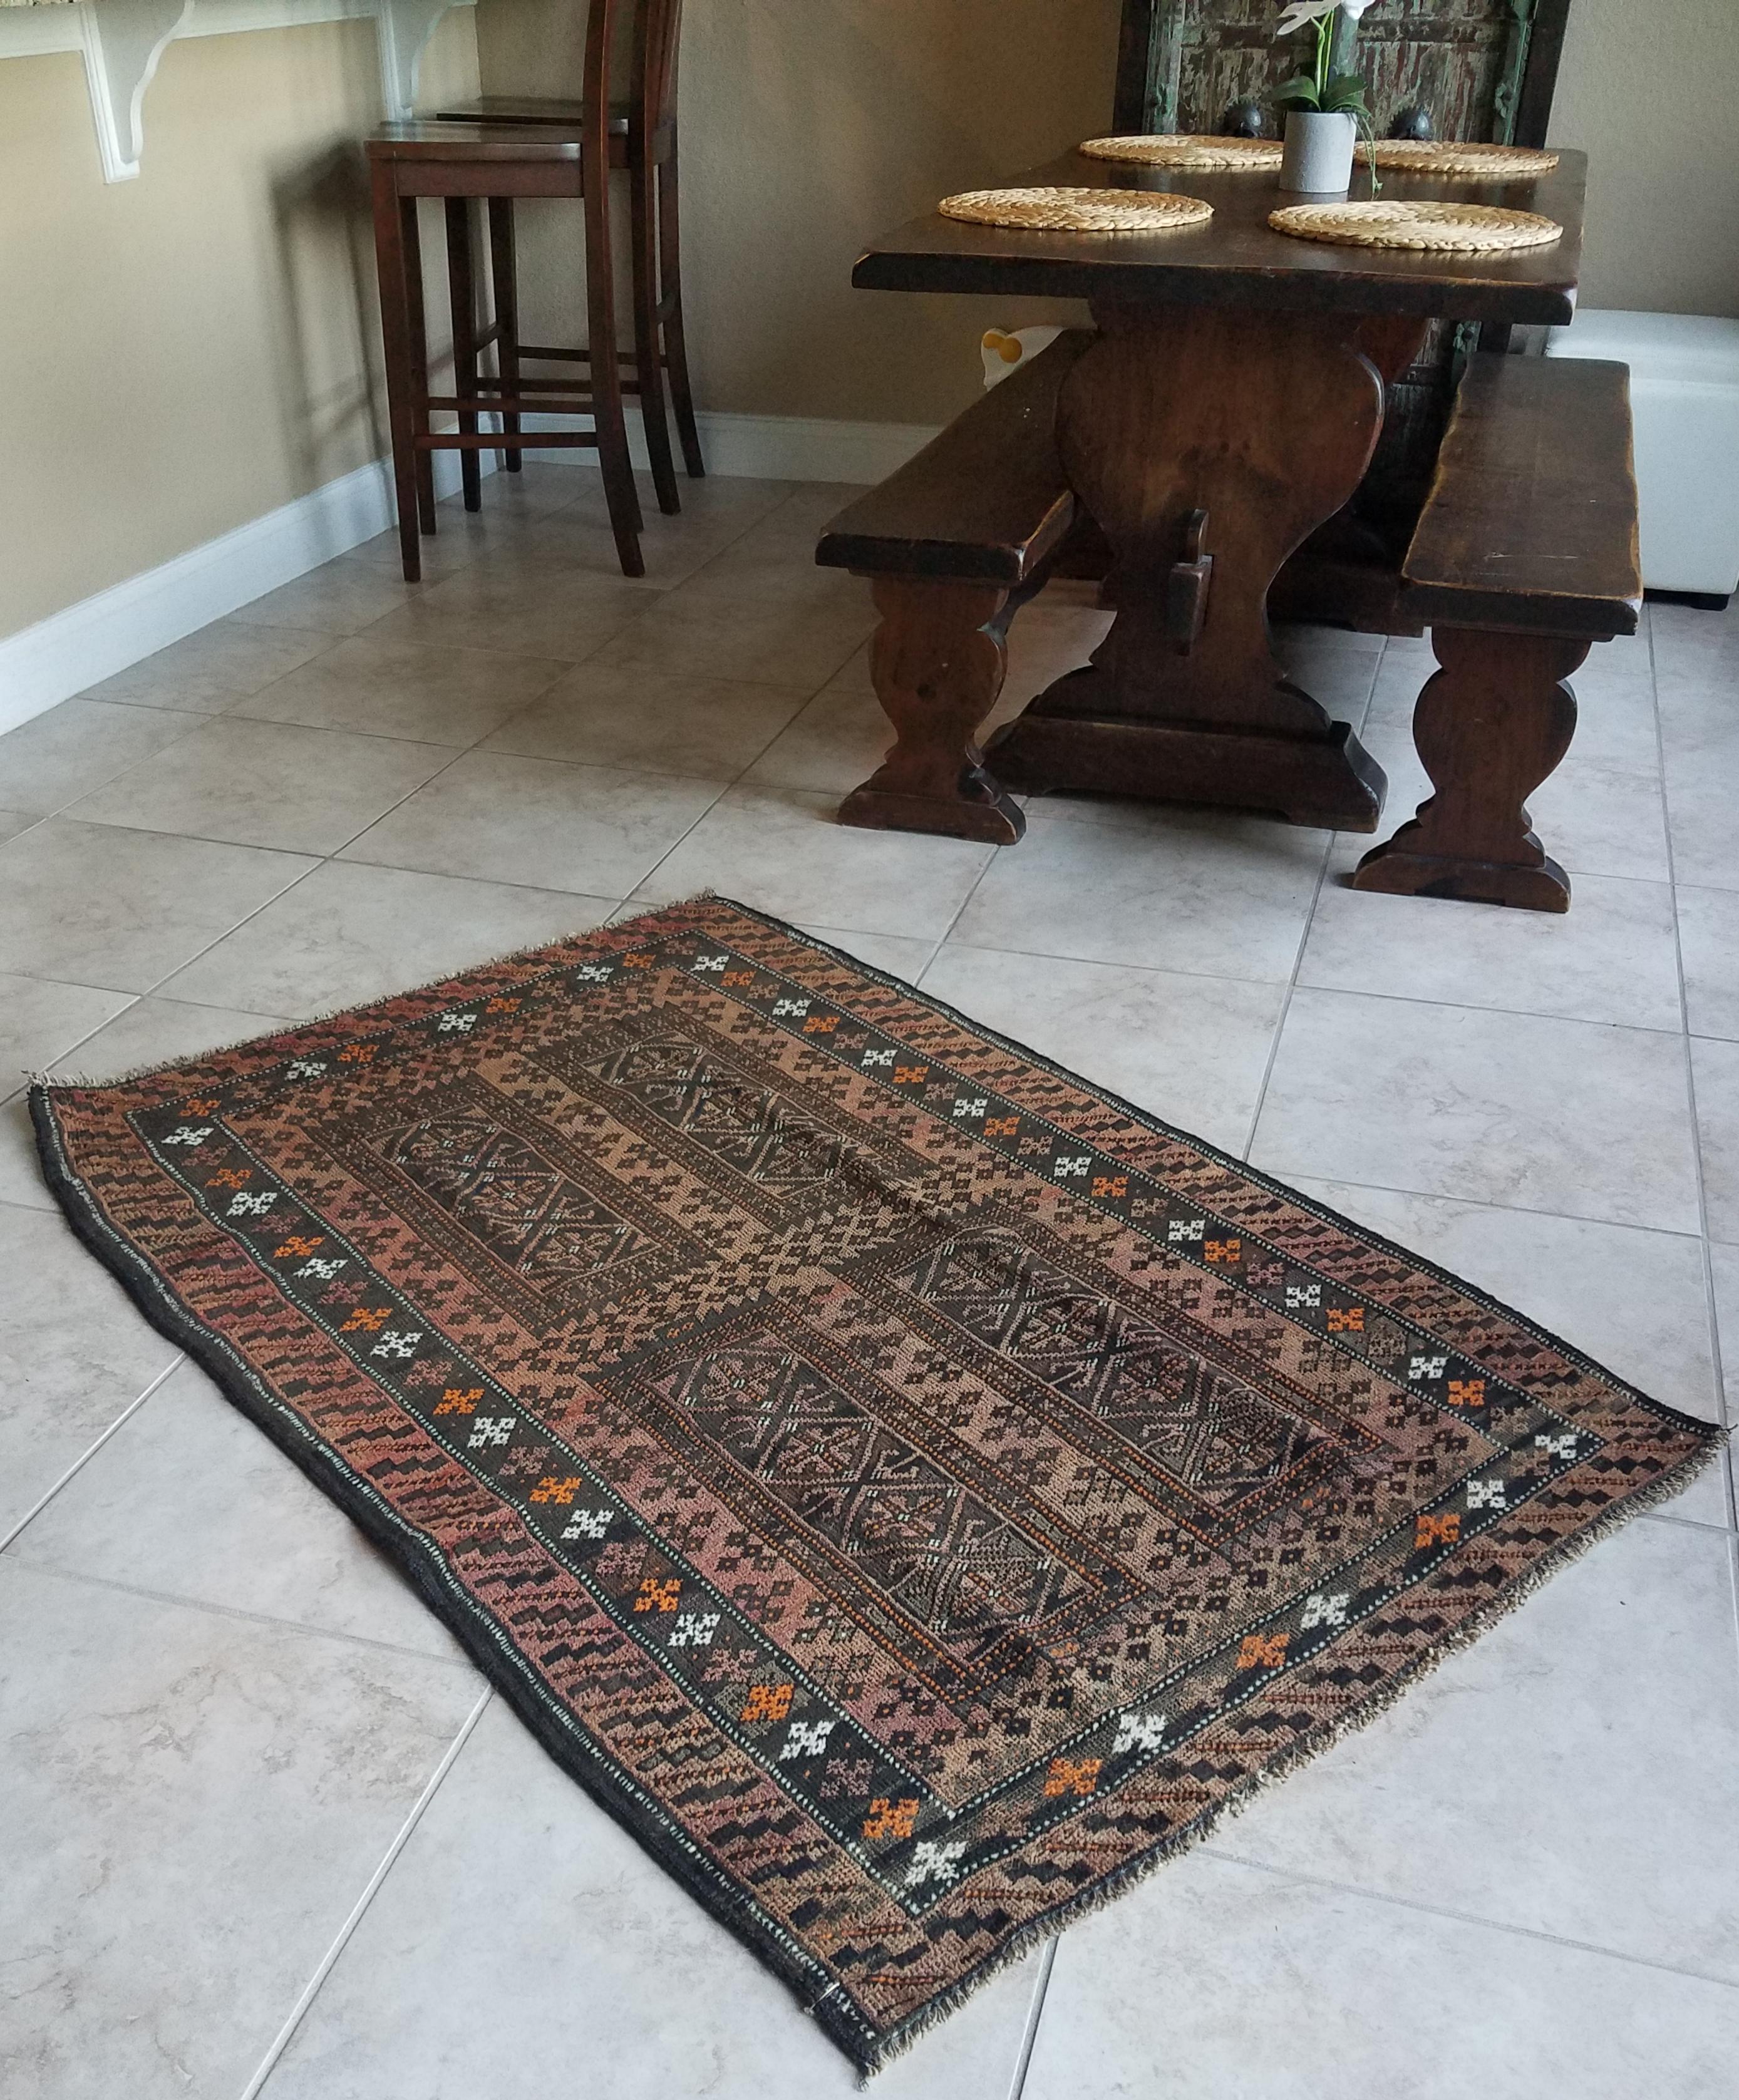 Incredible Piece of Art, Oriental Tribal Area Rug, Sar 5 In New Condition For Sale In Orlando, FL